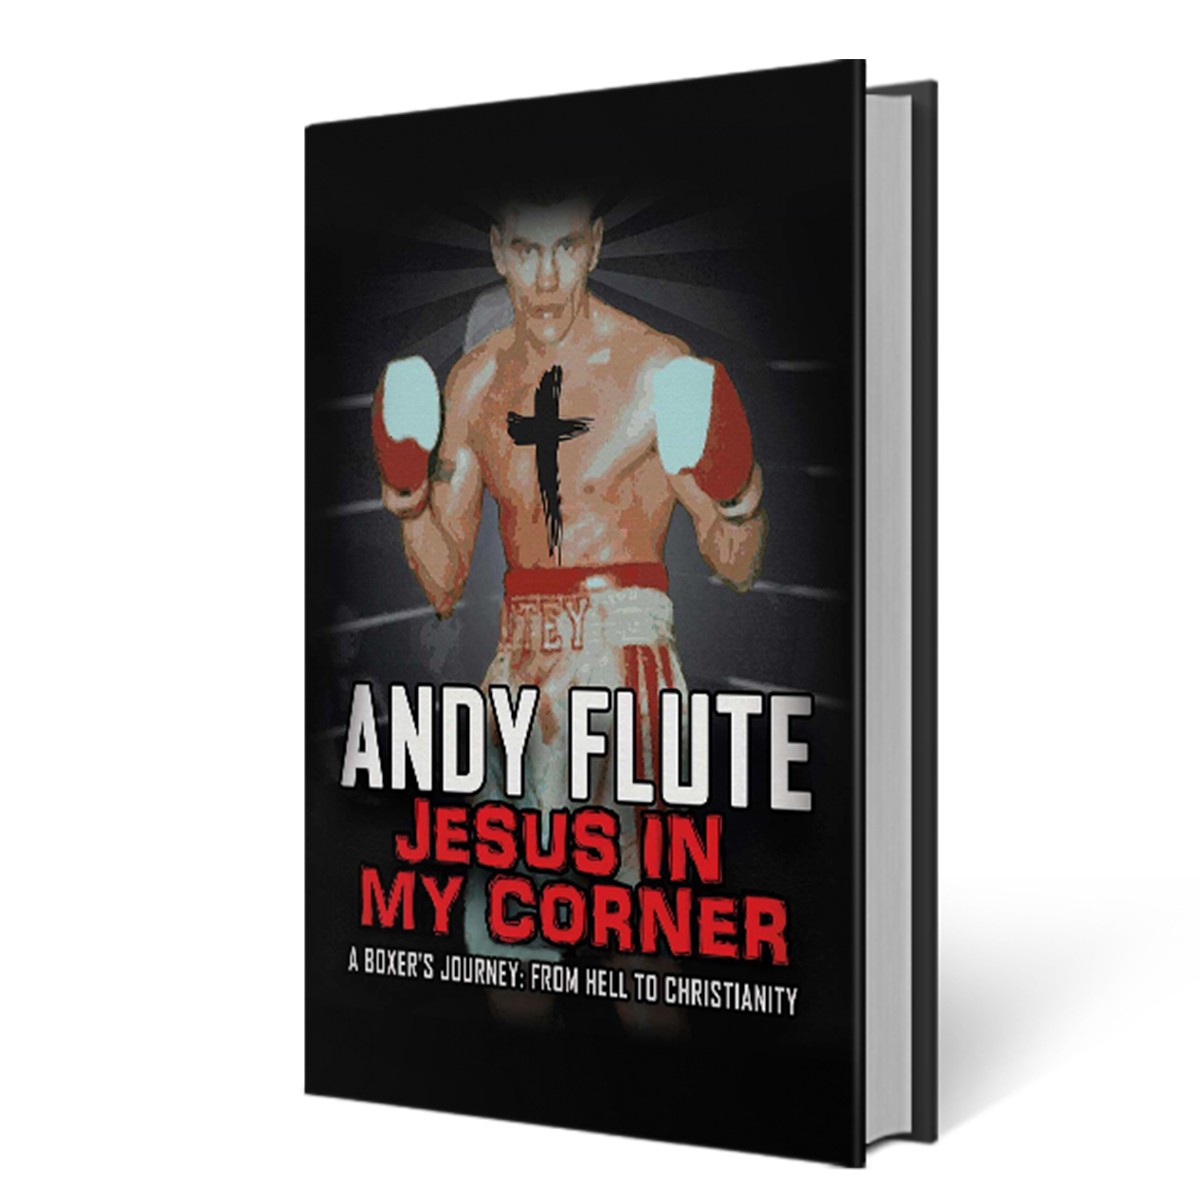 Wolverhampton City Radio Aired the Interview of the Author Andy Flute